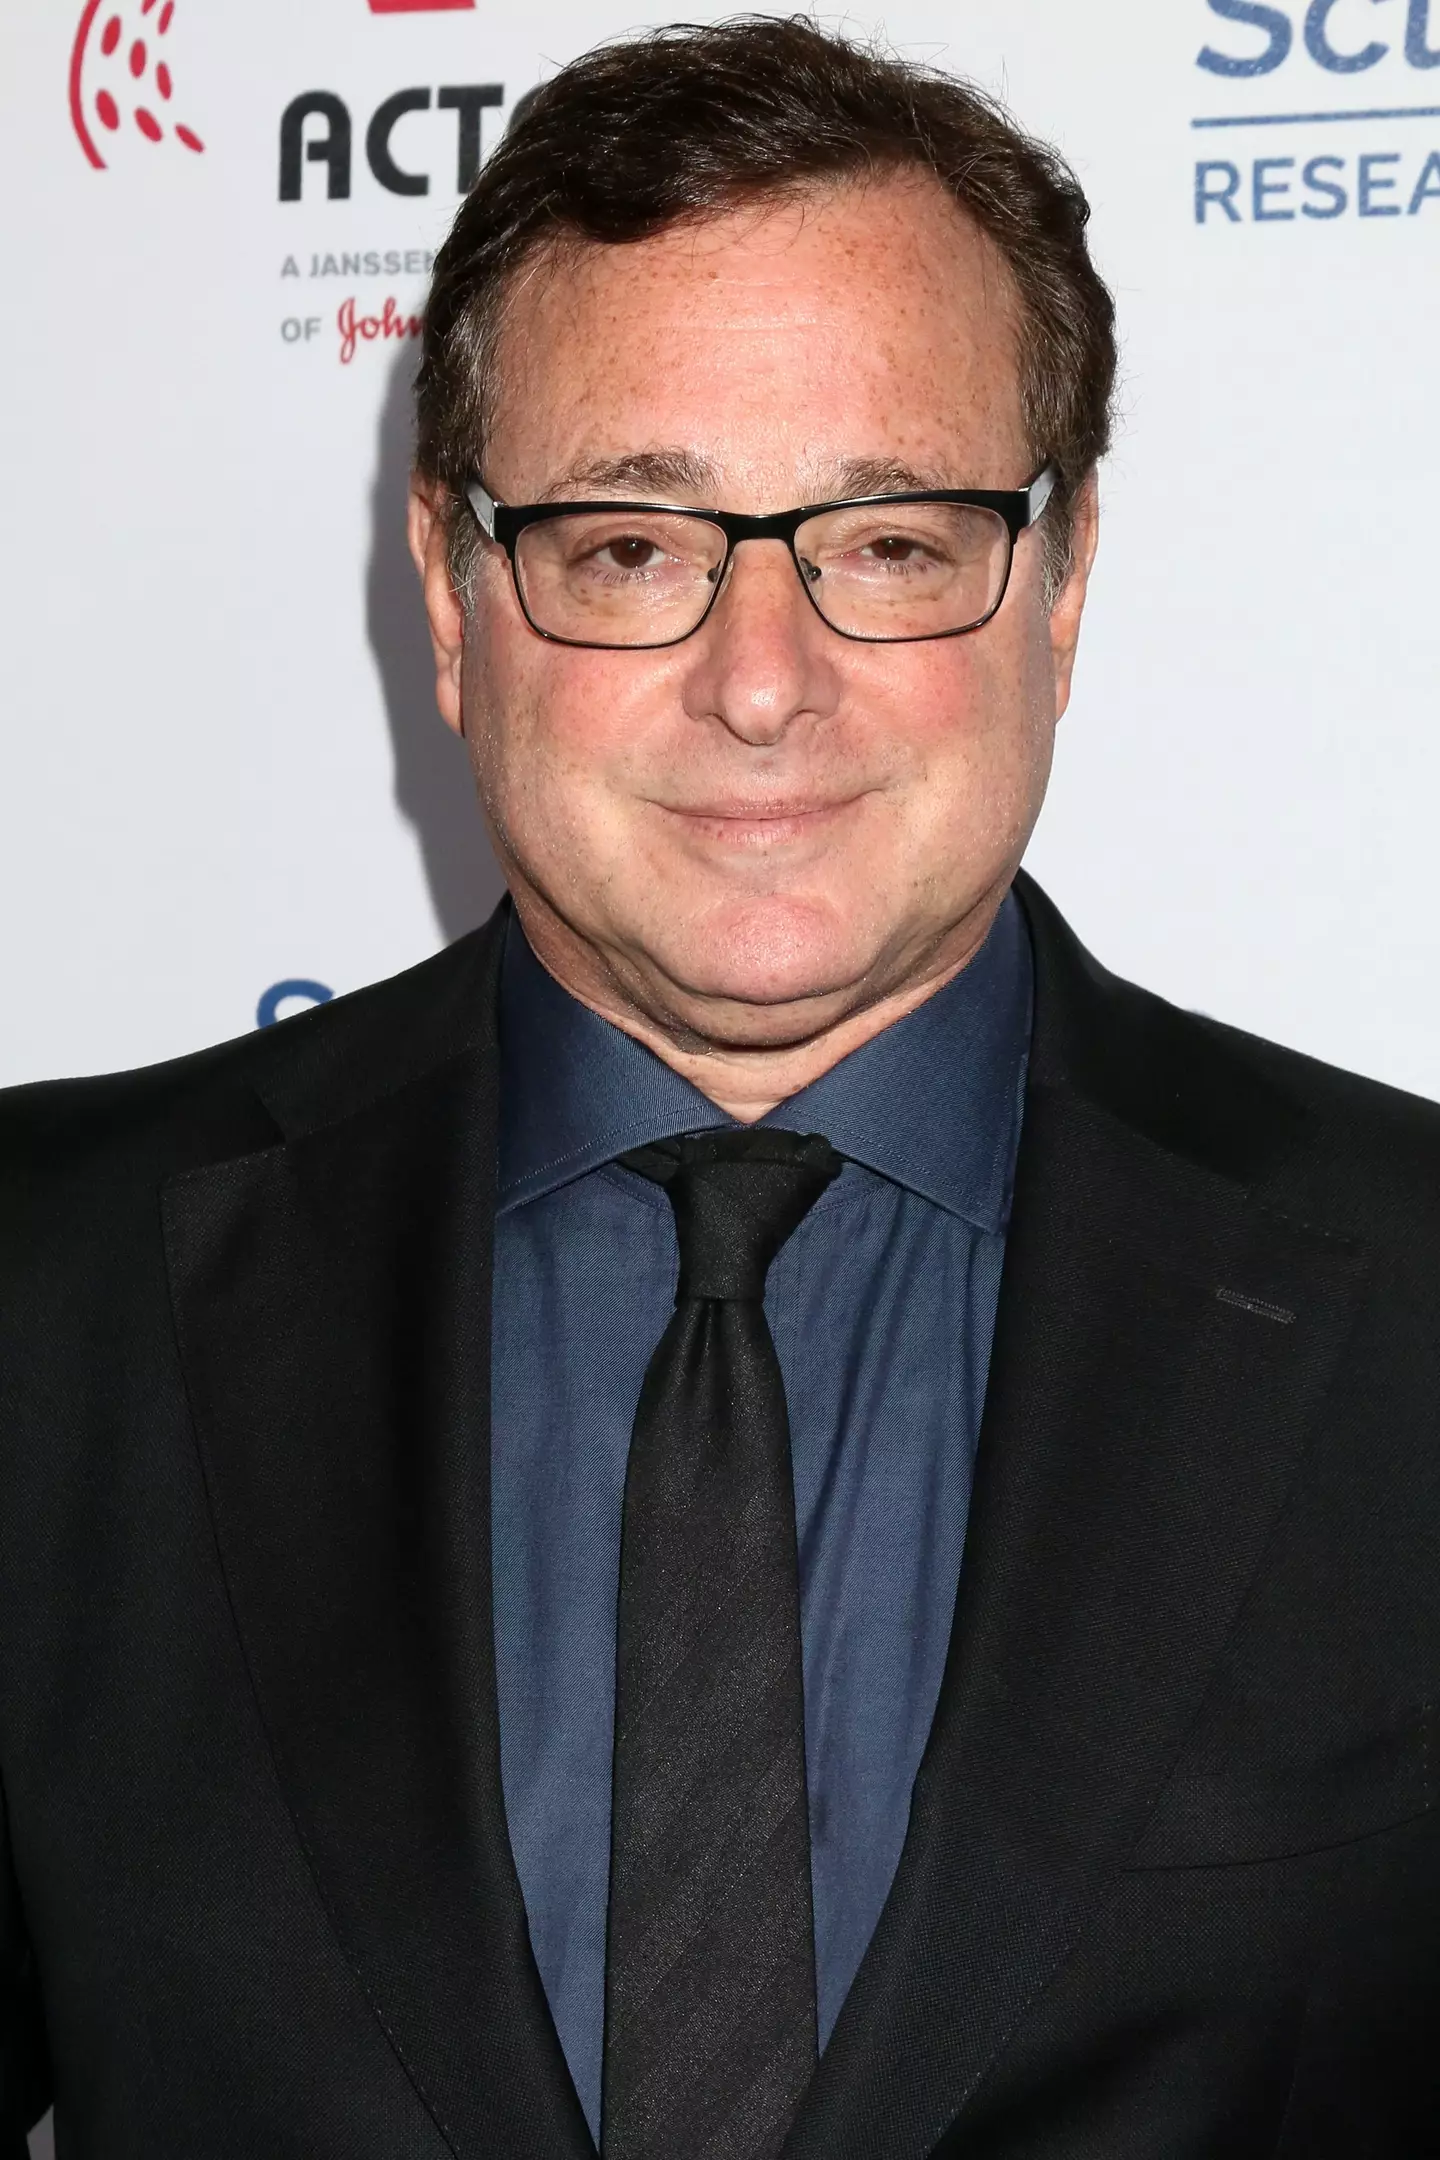 Florida police officers have reportedly been disciplined for sharing the news of Bob Saget's death.